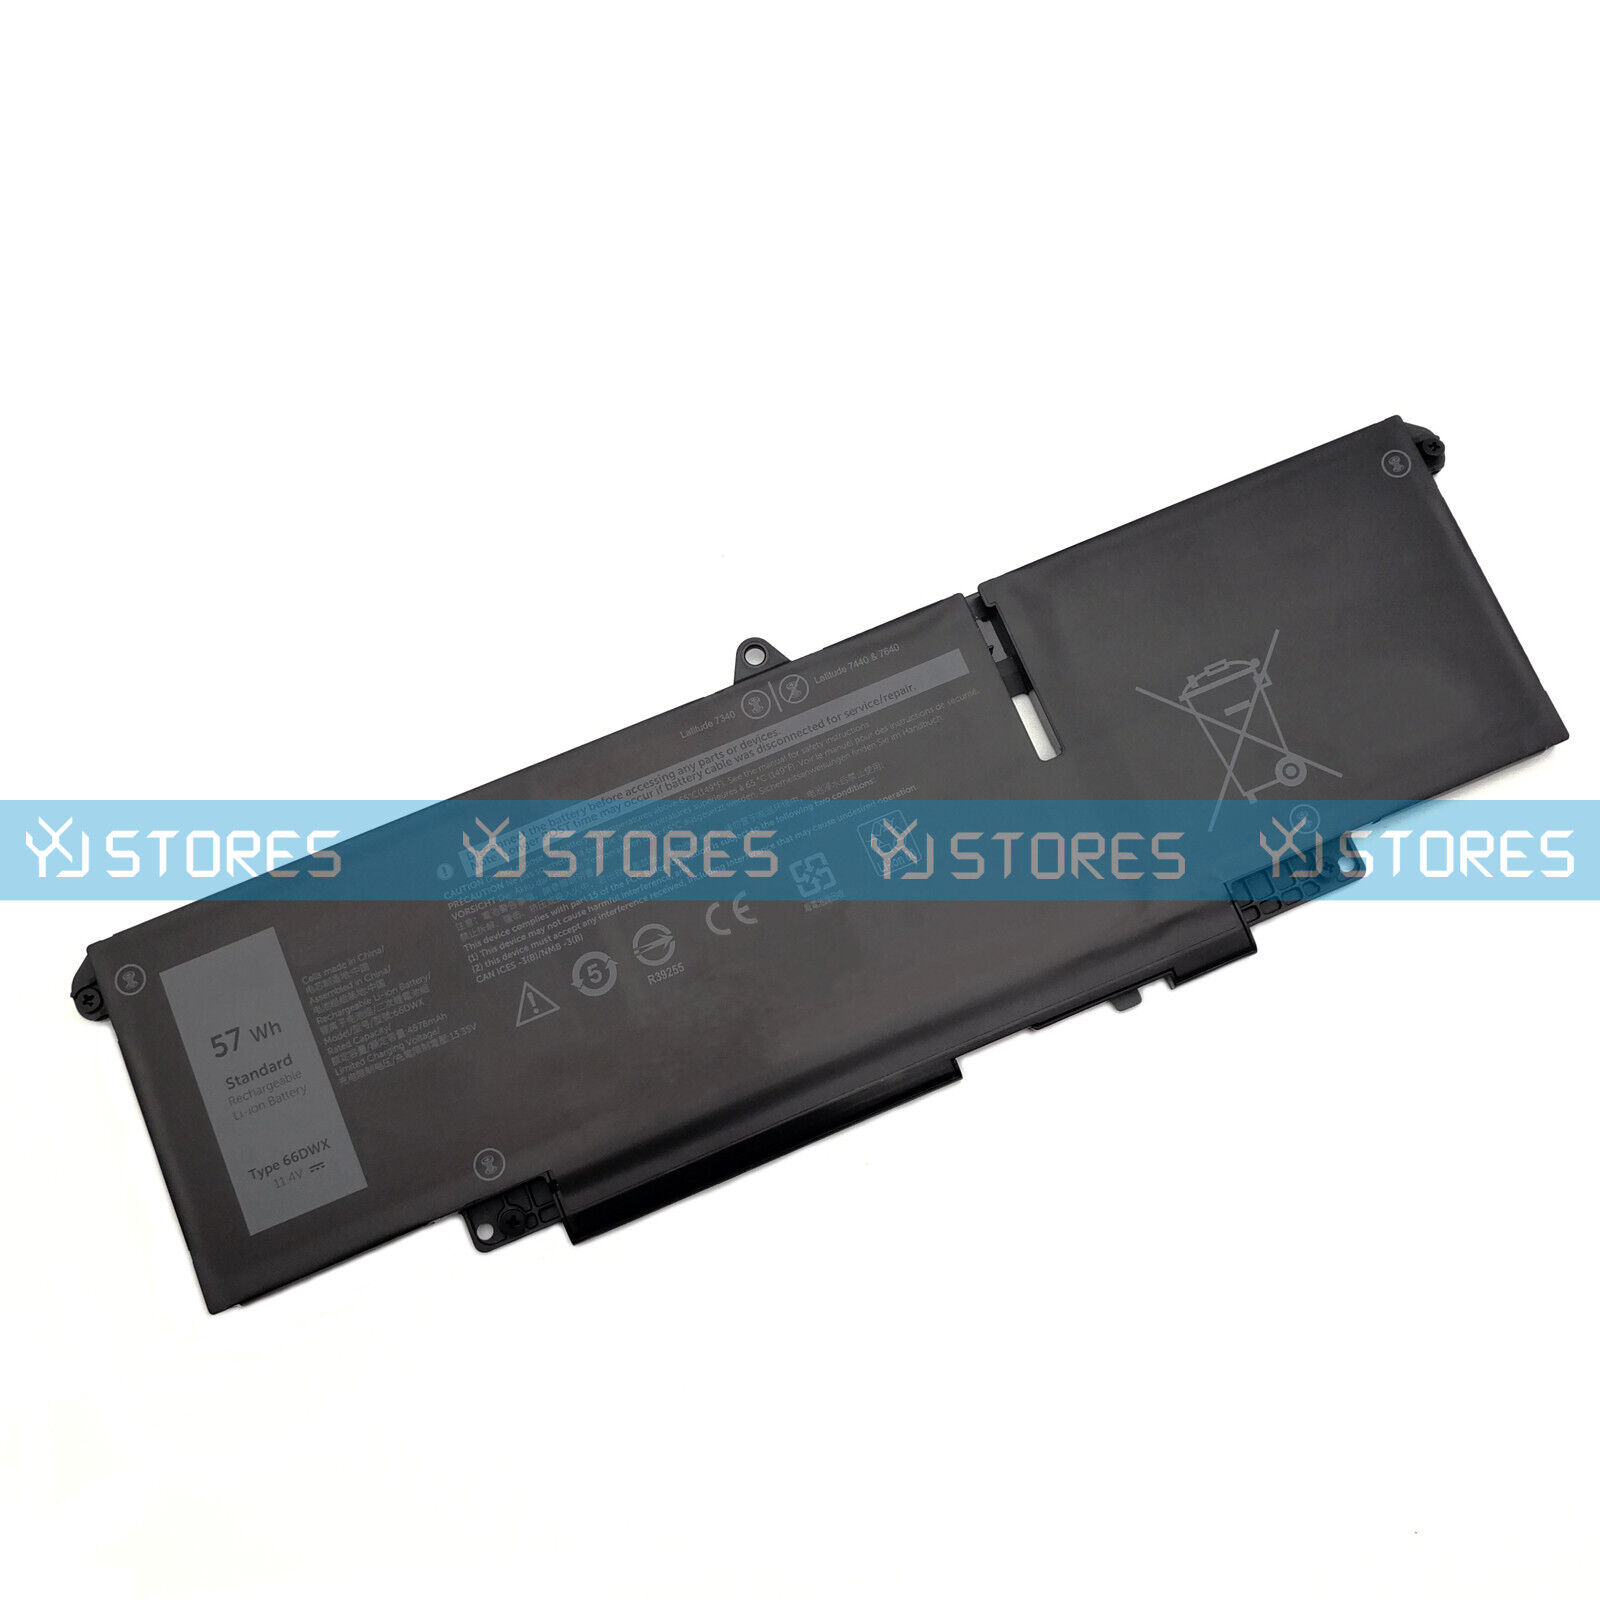 New 66DWX 11.4V 57Wh Laptop Battery for Dell Latitude 7340 7440 7640 WW8N8 047T0